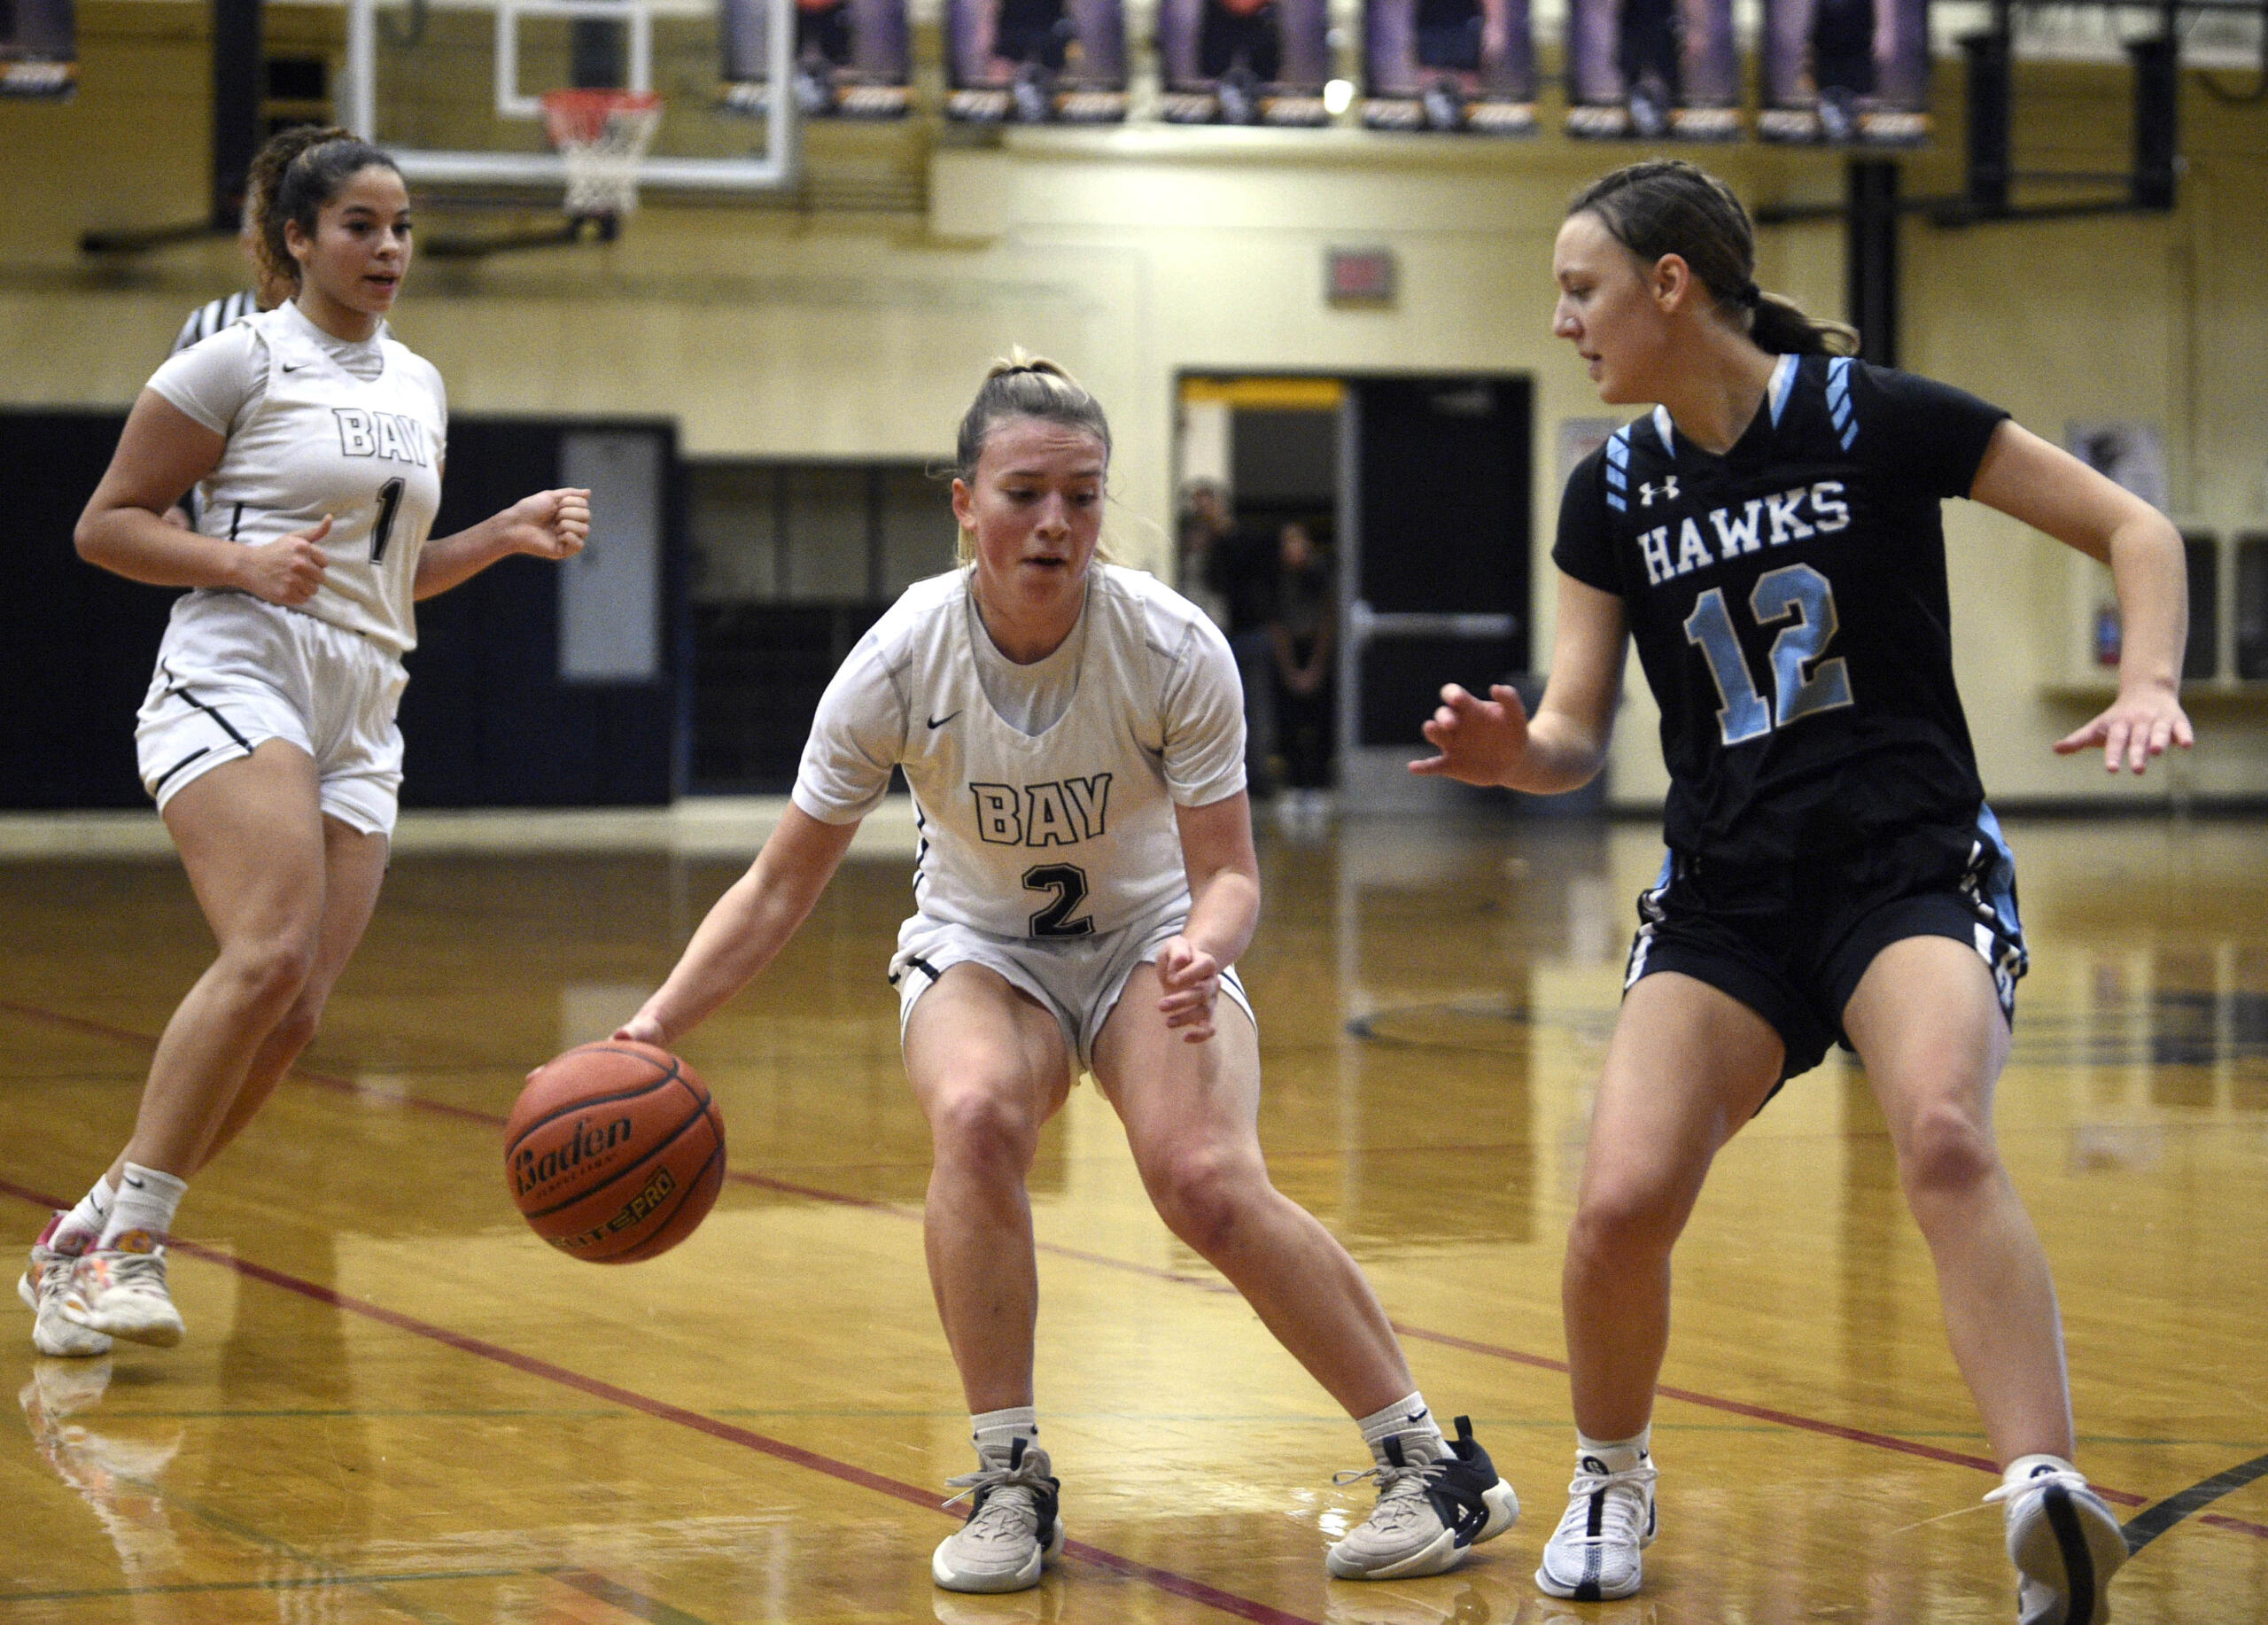 Hudson’s Bay’s Promise Bond, center, looks to change direction while dribbling against Hockinson’s Kathryn White during a 2A Greater St. Helens League girls basketball game on Friday, Dec. 8, 2023, at Hudson’s Bay High School.